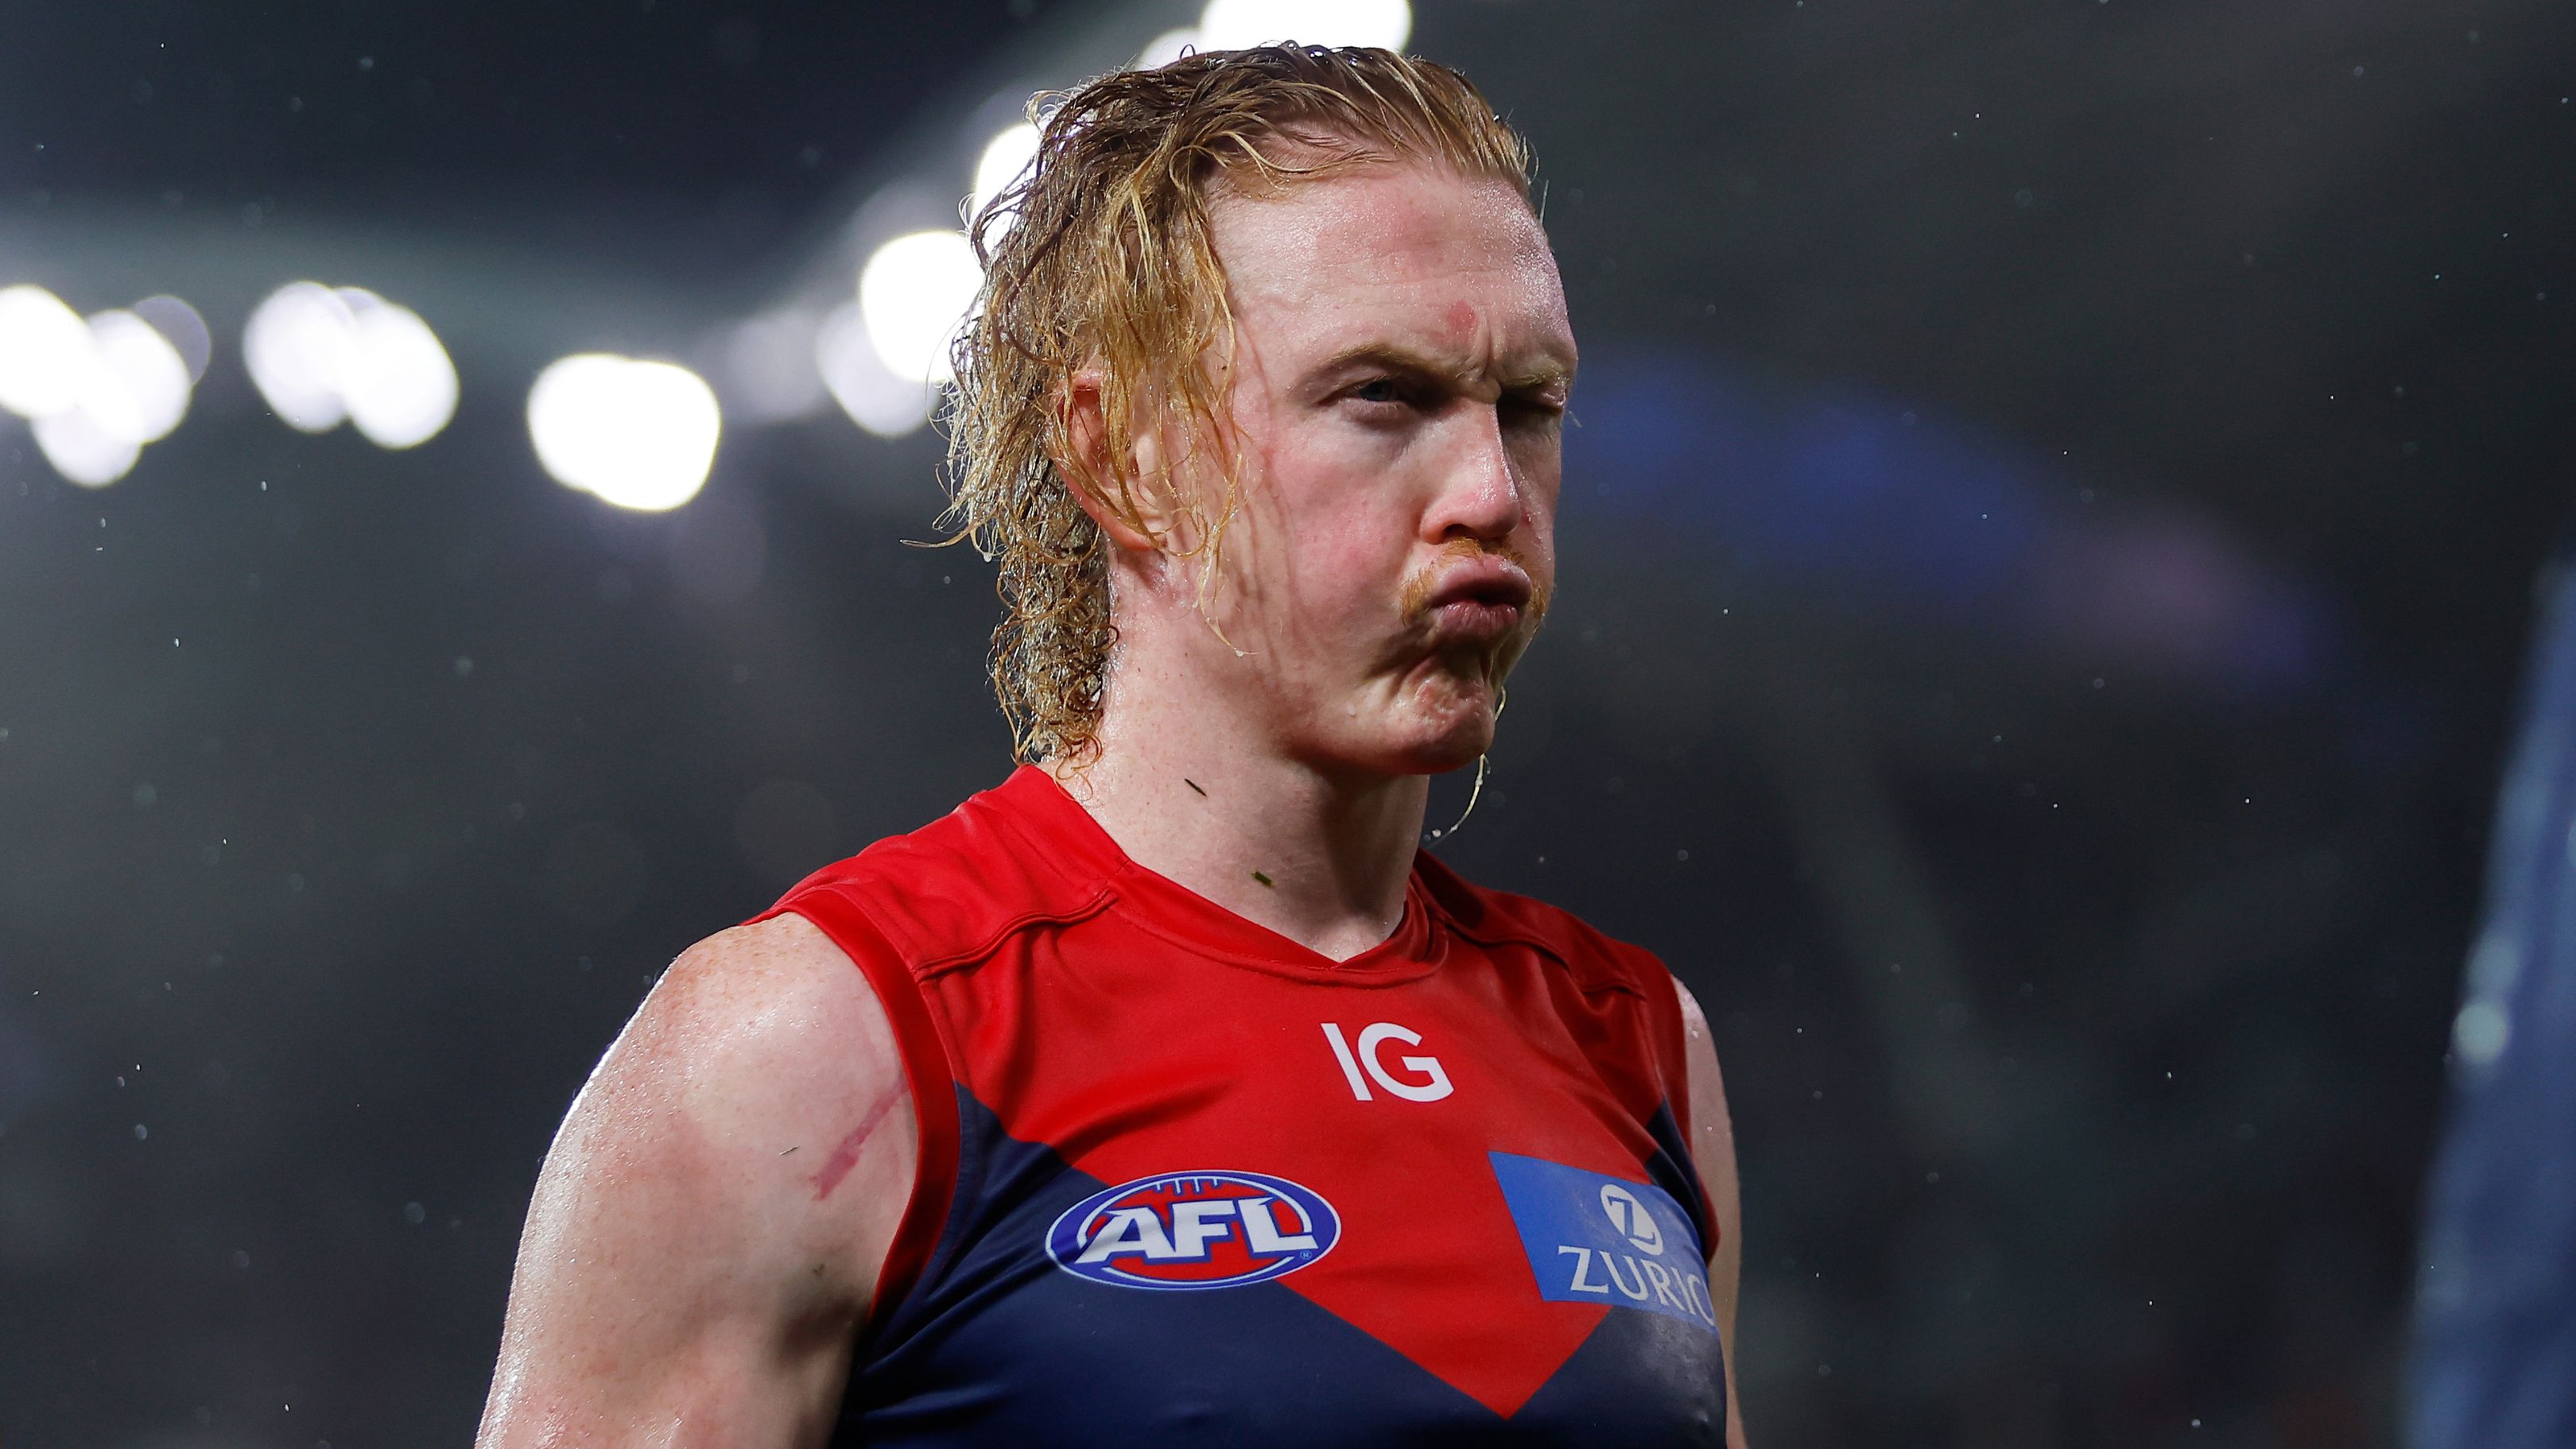 ADELAIDE, AUSTRALIA - APRIL 15: Clayton Oliver of the Demons leaves the field after a loss during the 2023 AFL Round 05 match between the Essendon Bombers and the Melbourne Demons at Adelaide Oval on April 15, 2023 in Adelaide, Australia. (Photo by Dylan Burns/AFL Photos)